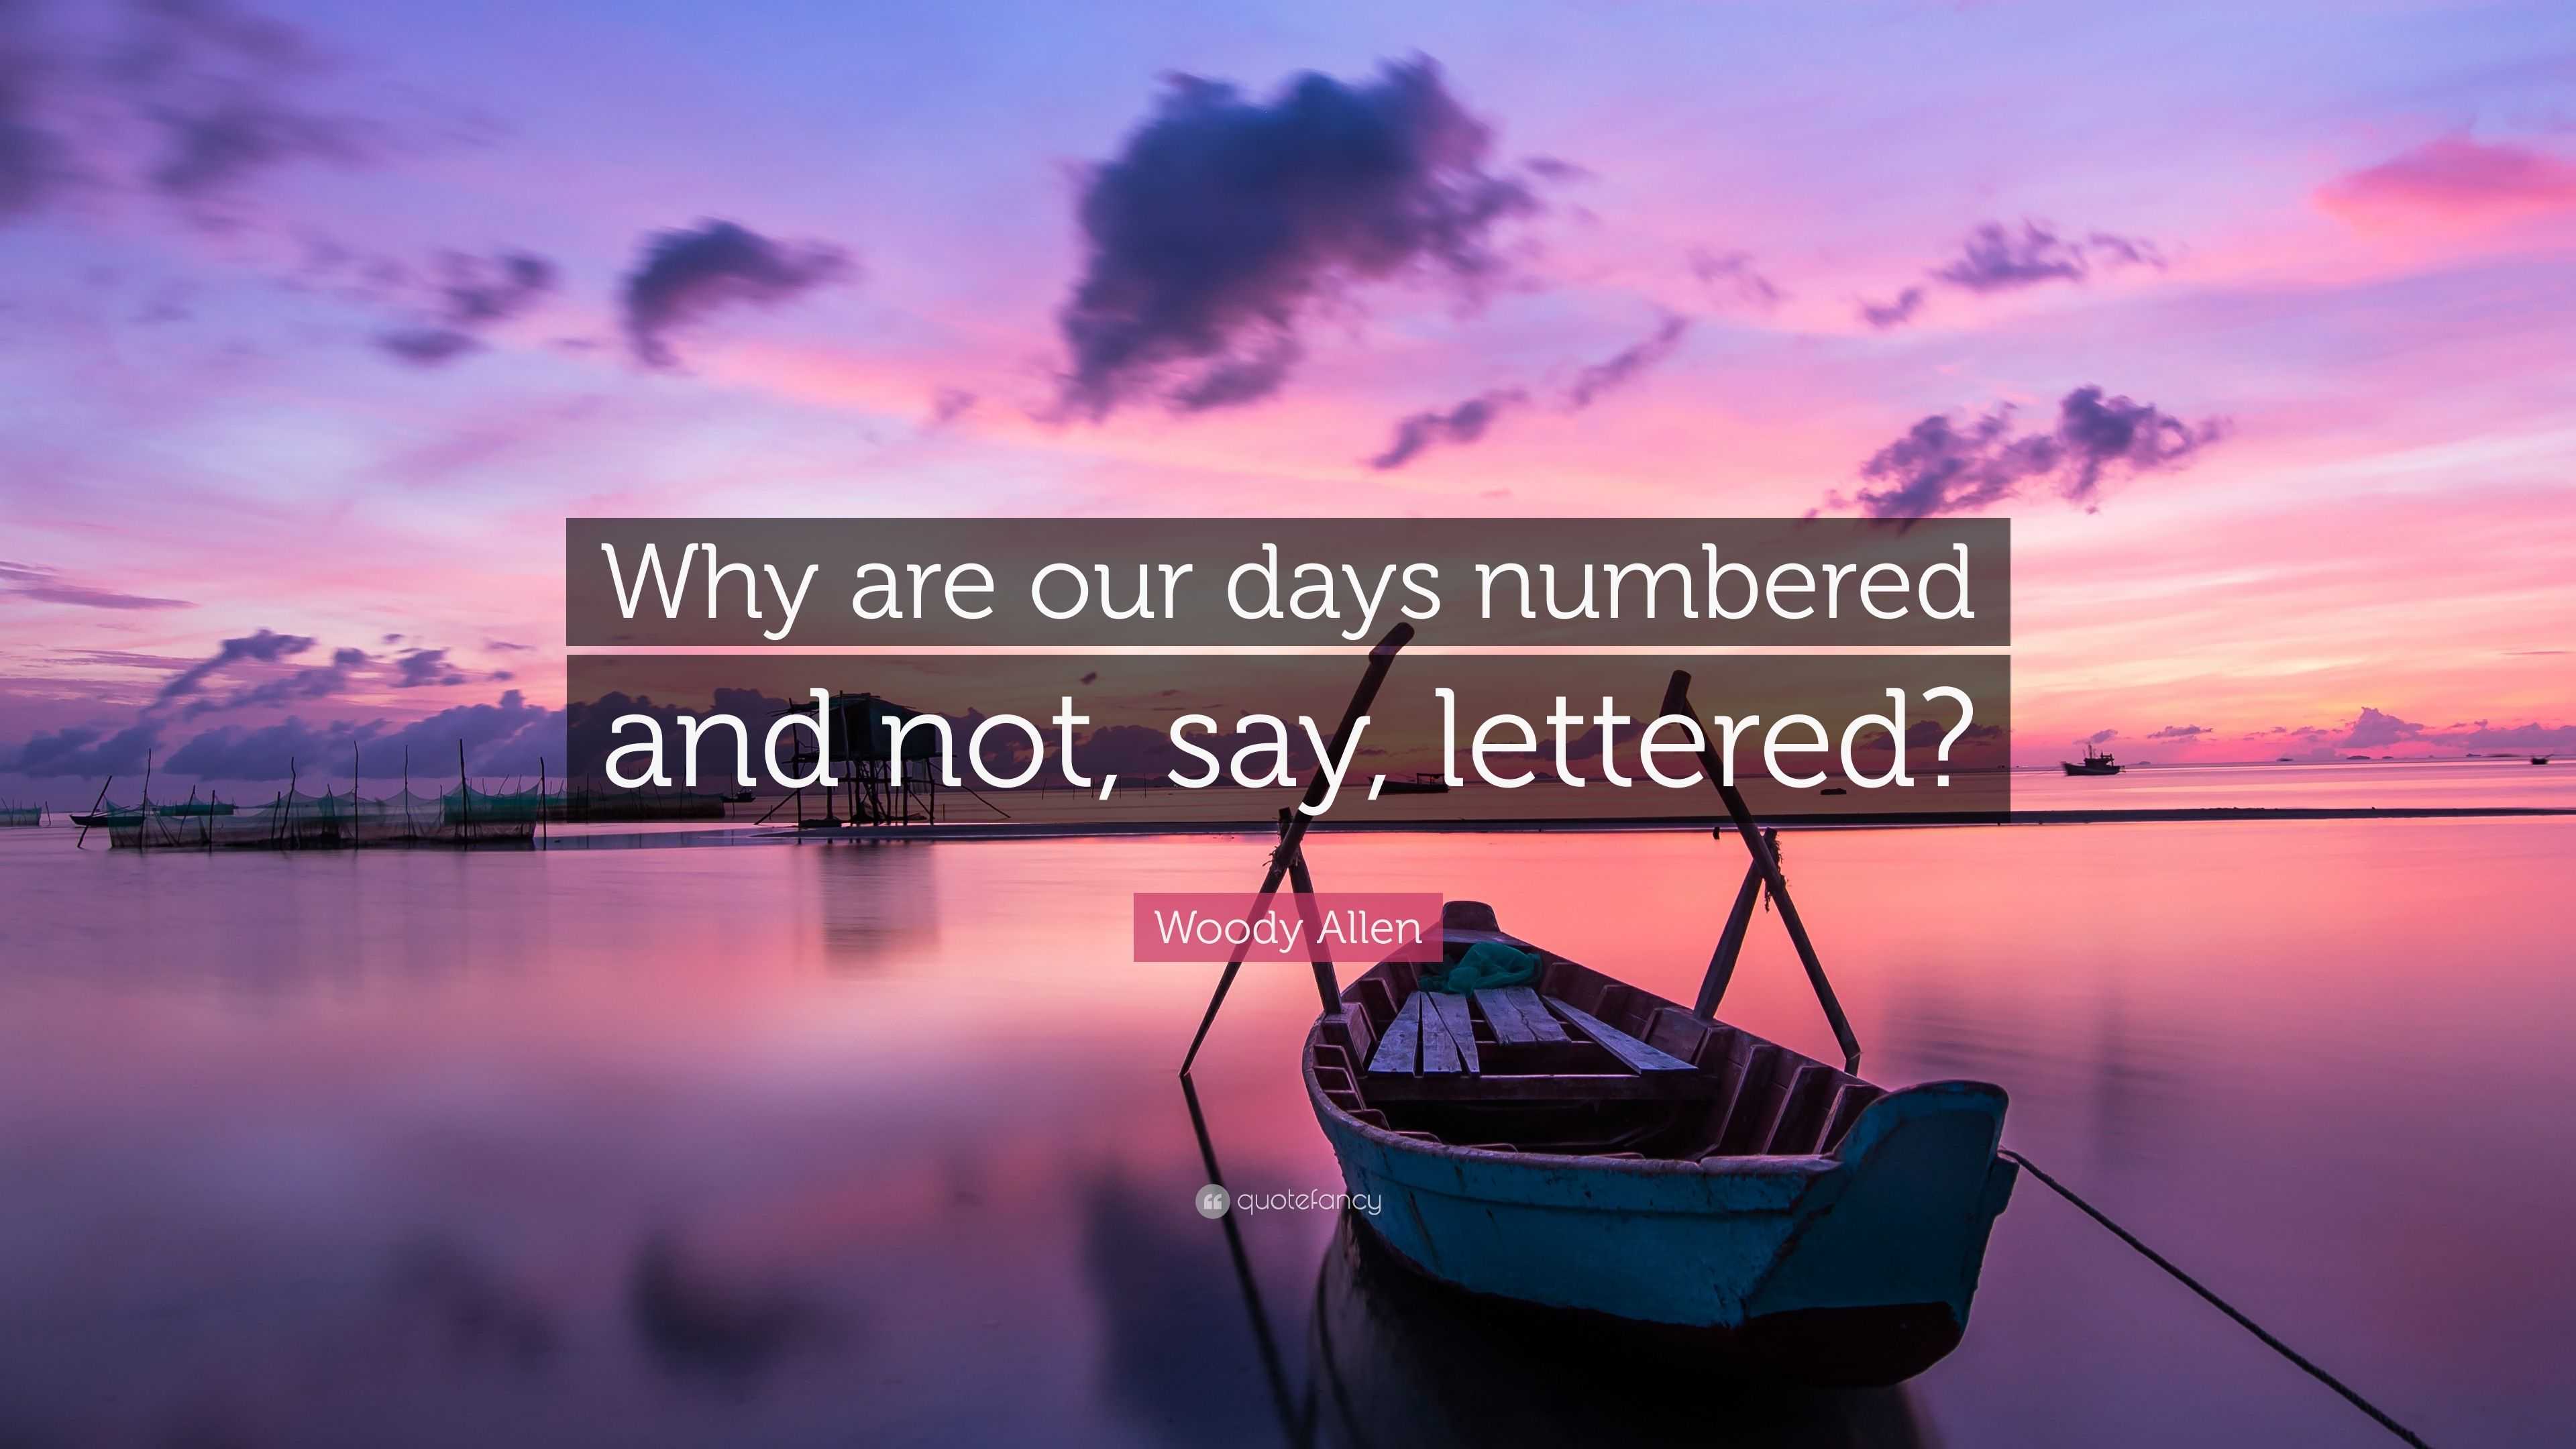 Woody Allen Quote: “Why are our days numbered and not, say, lettered?”